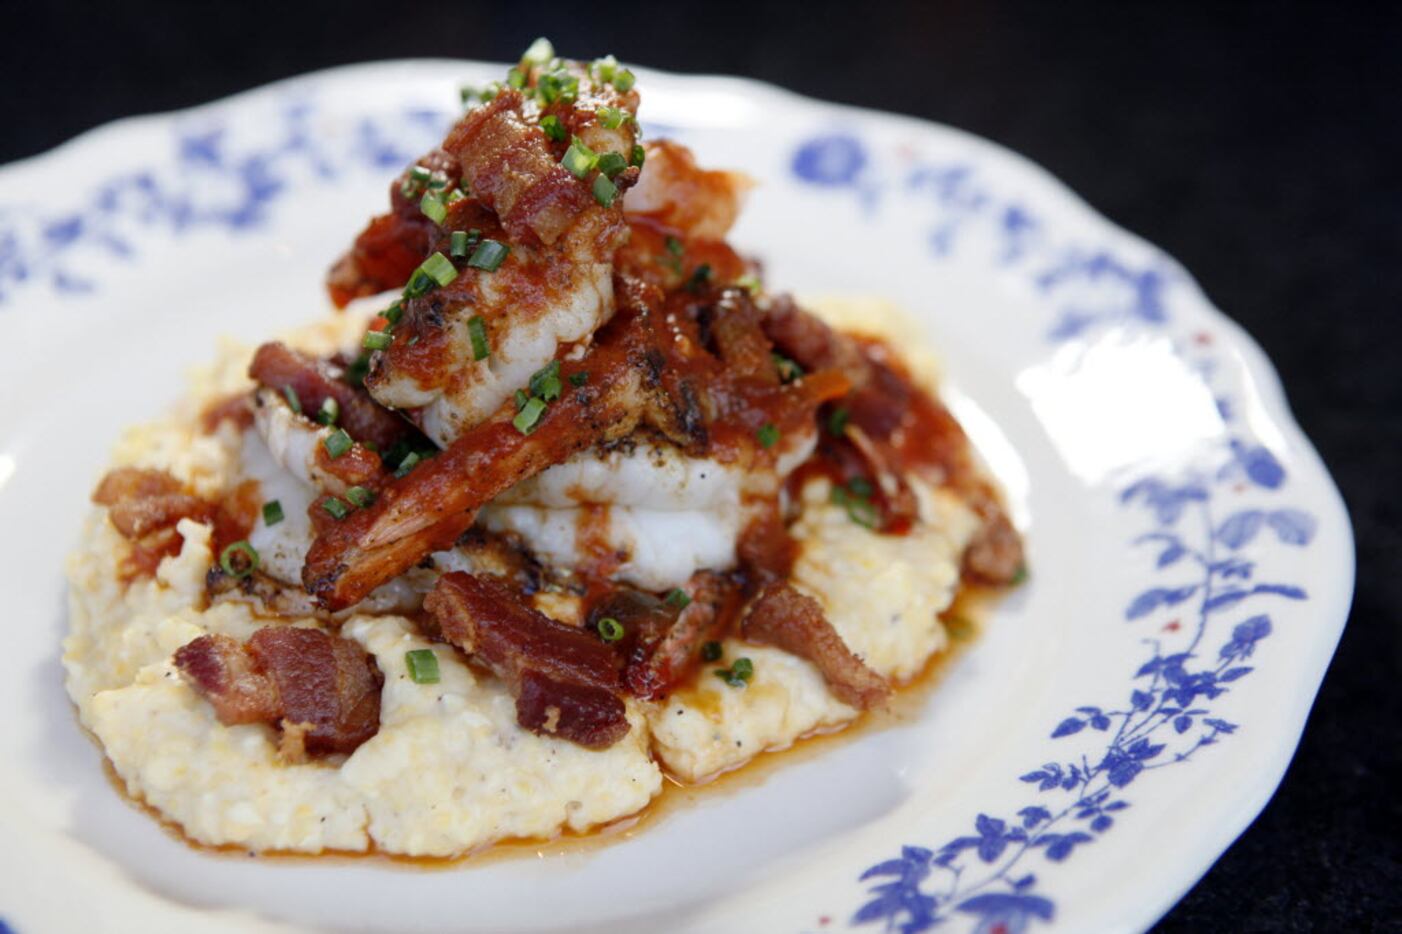 Shrimp and grits from the restaurant Ida Claire, on Tuesday, Sept. 29, 2015 in Addison. Ben...